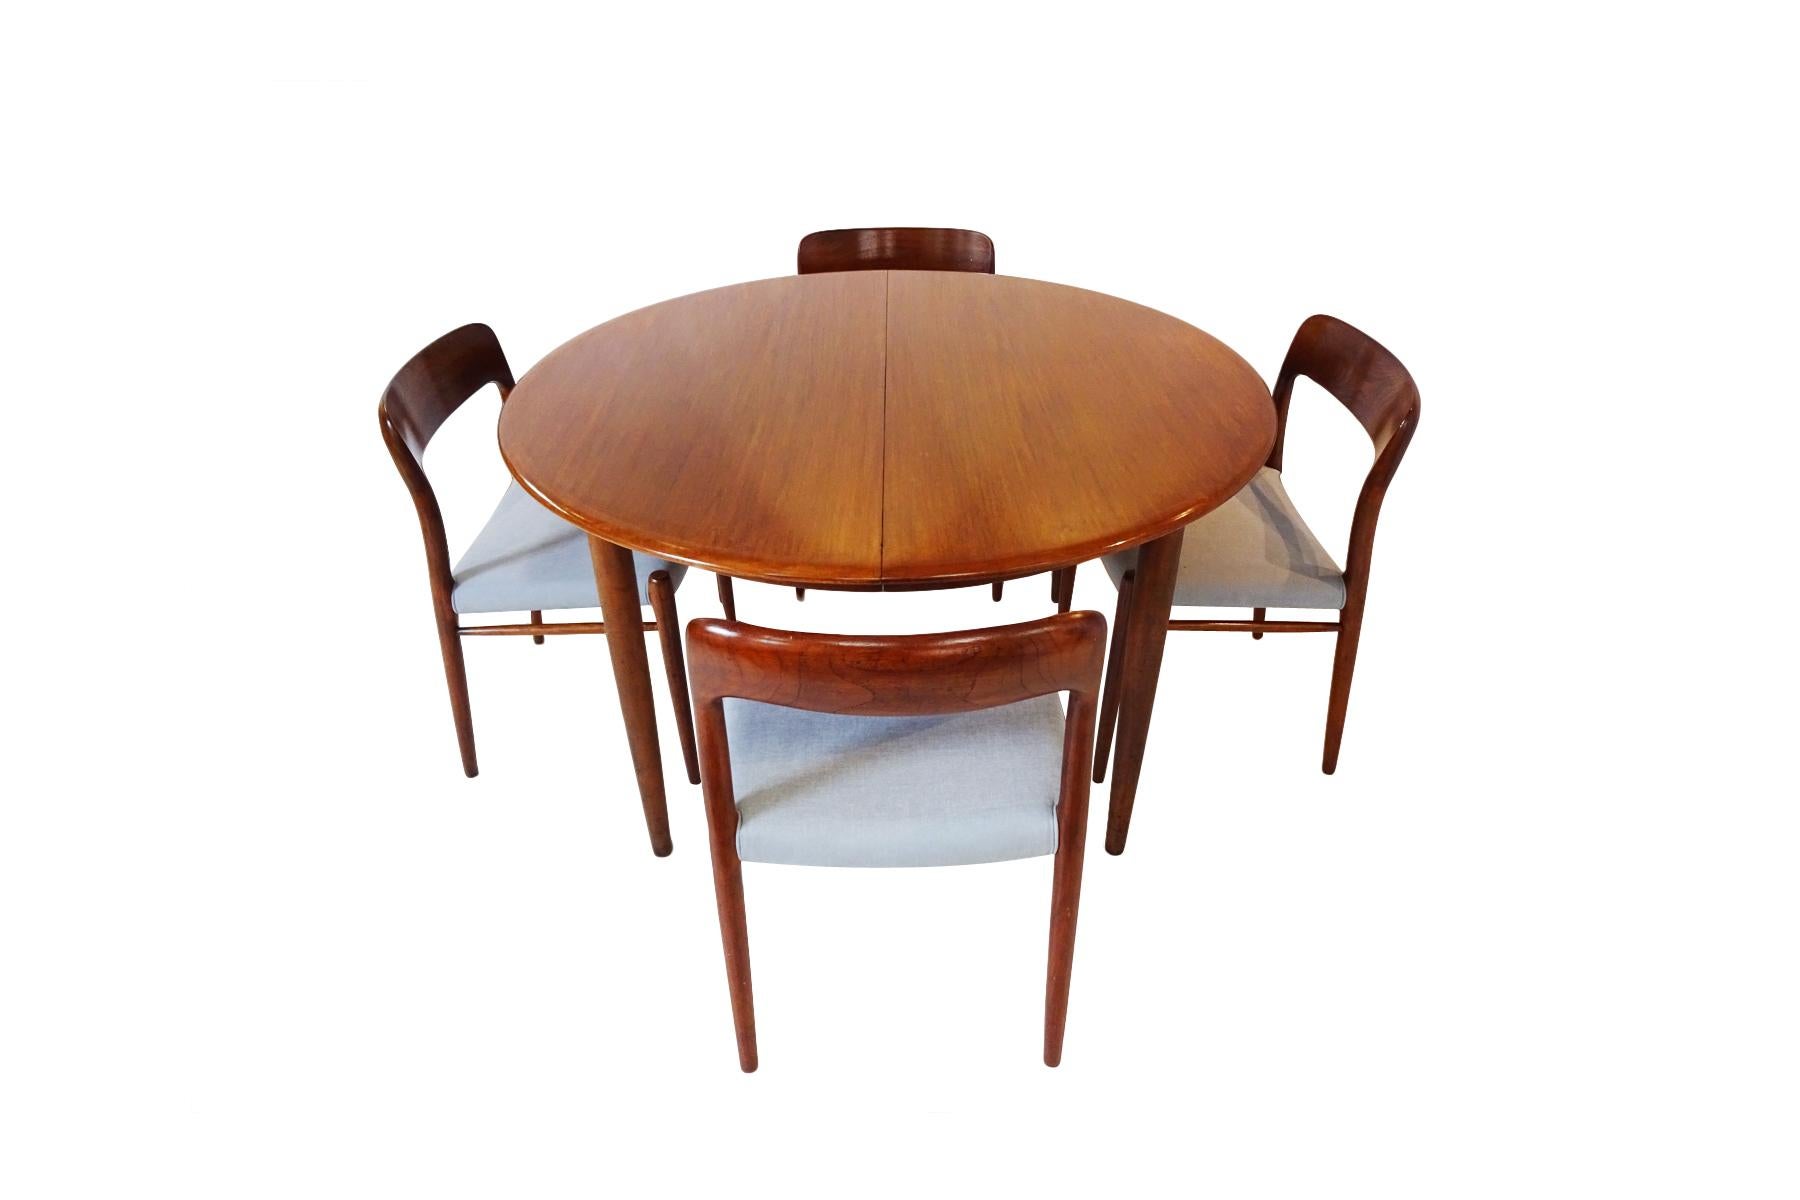 20th Century Dining Set - Danish Midcentury Teak table and 8 chairs by Niels Otto Moller